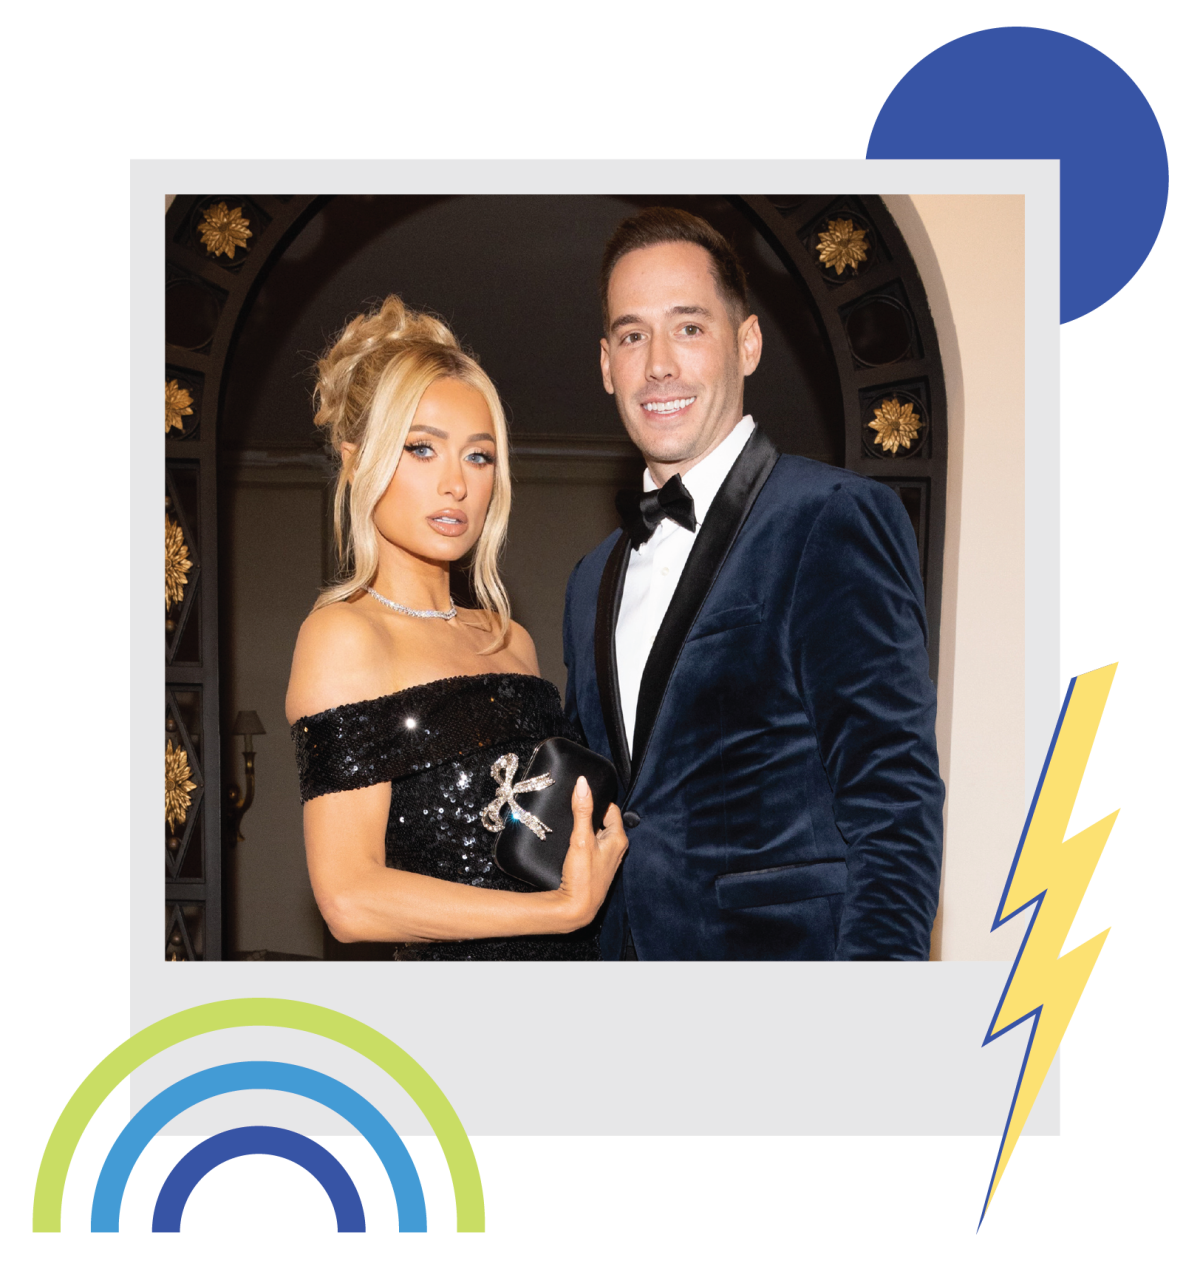 Photo illustration of a Polaroid image of a woman and a man posing in formal clothing and shapes around: bolt, circle and arcs.